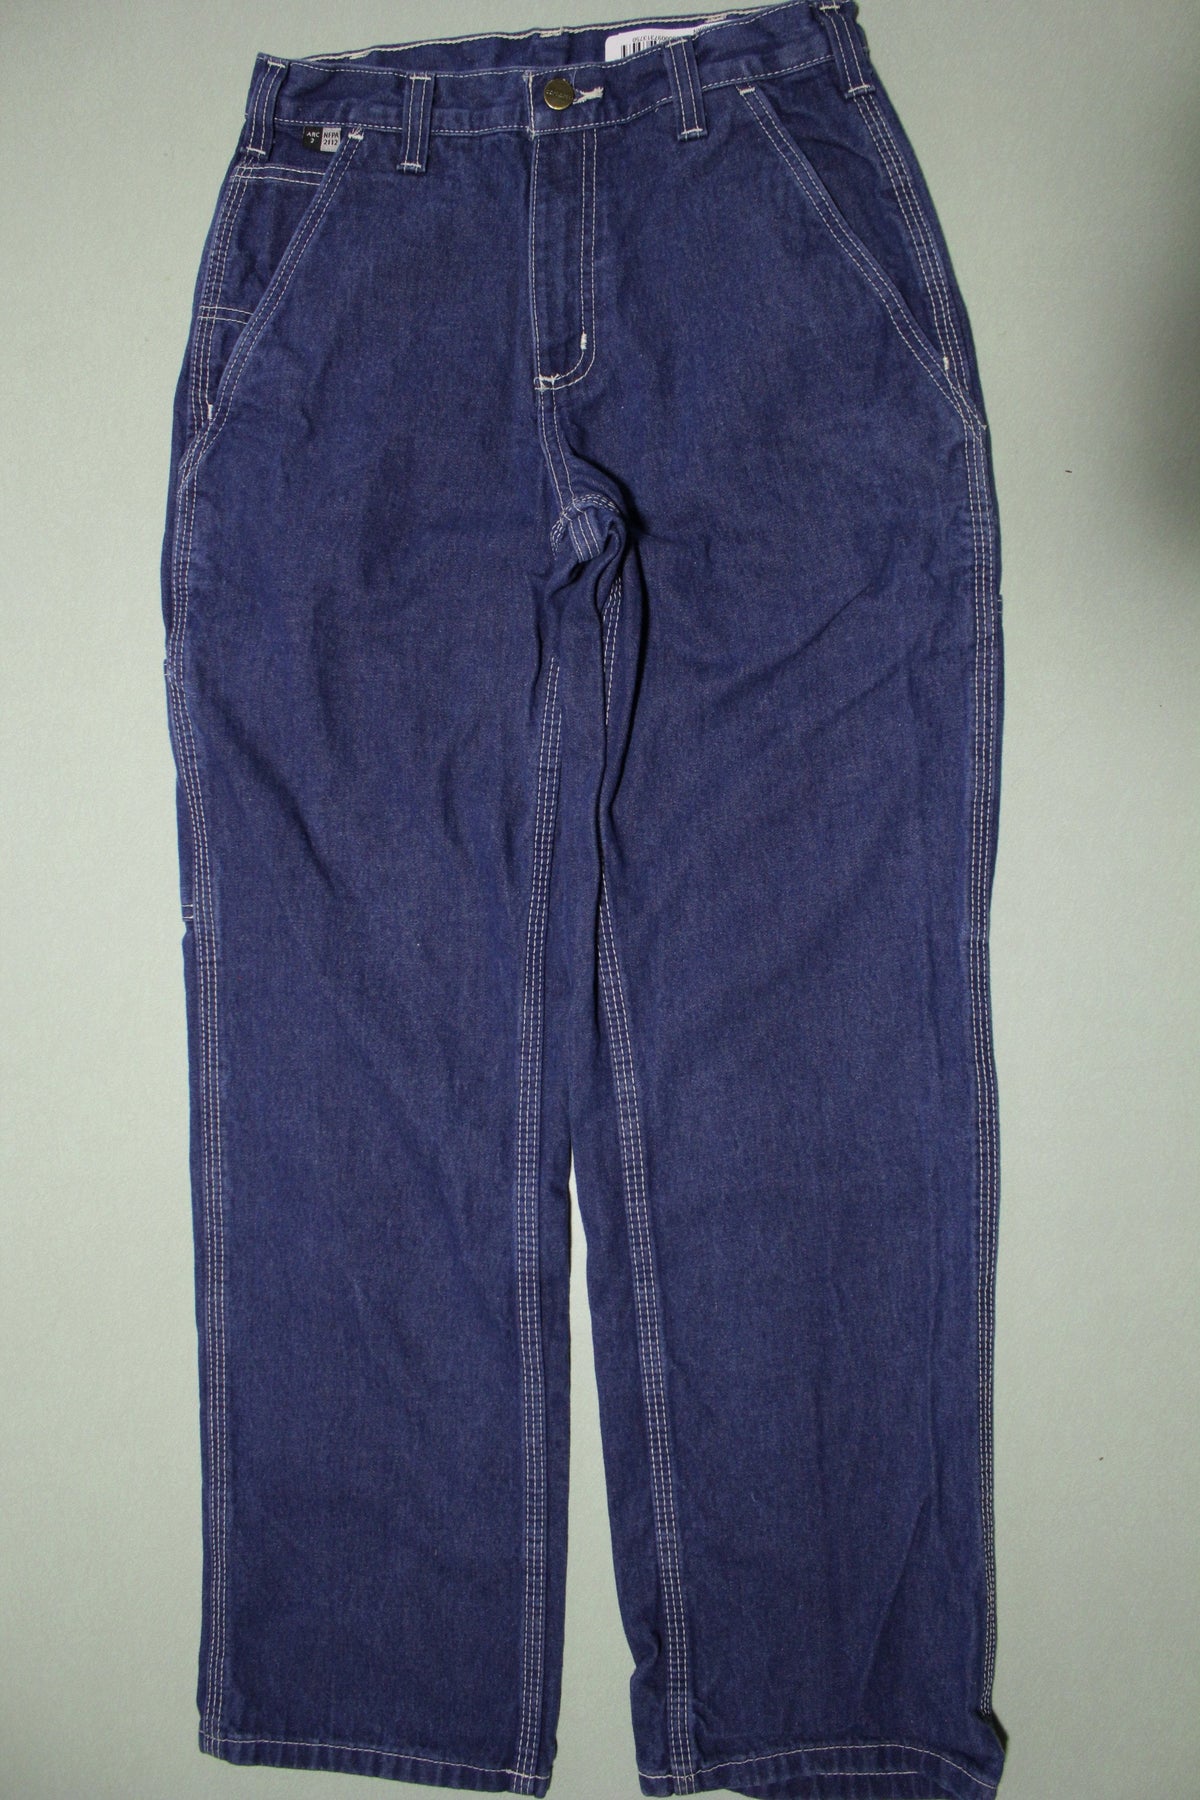 Carhartt 290-83 Fire Resistant FR NFPA 70E Jean Pants Arc Flash HRC Catagory 2